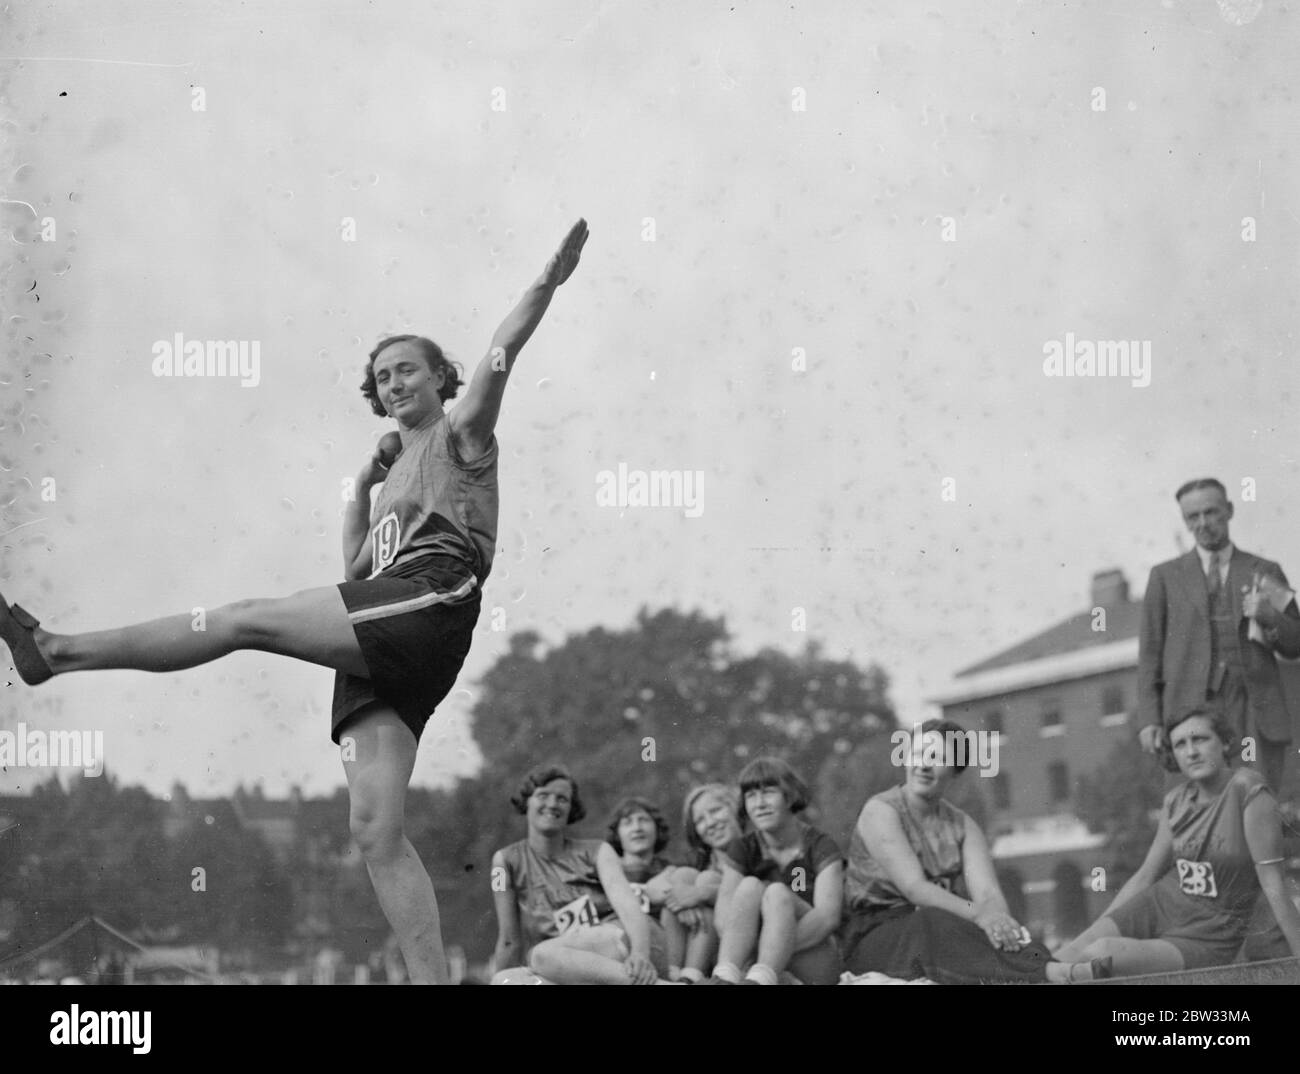 Throwing the discus at women 's inter county sports at Chelsea . Miss A Stone of Surrey , in fine action throwing the discus , at the women 's inter county sports , at the Duke of York 's Headquarters , Chelsea , London . 17 September 1932 Stock Photo